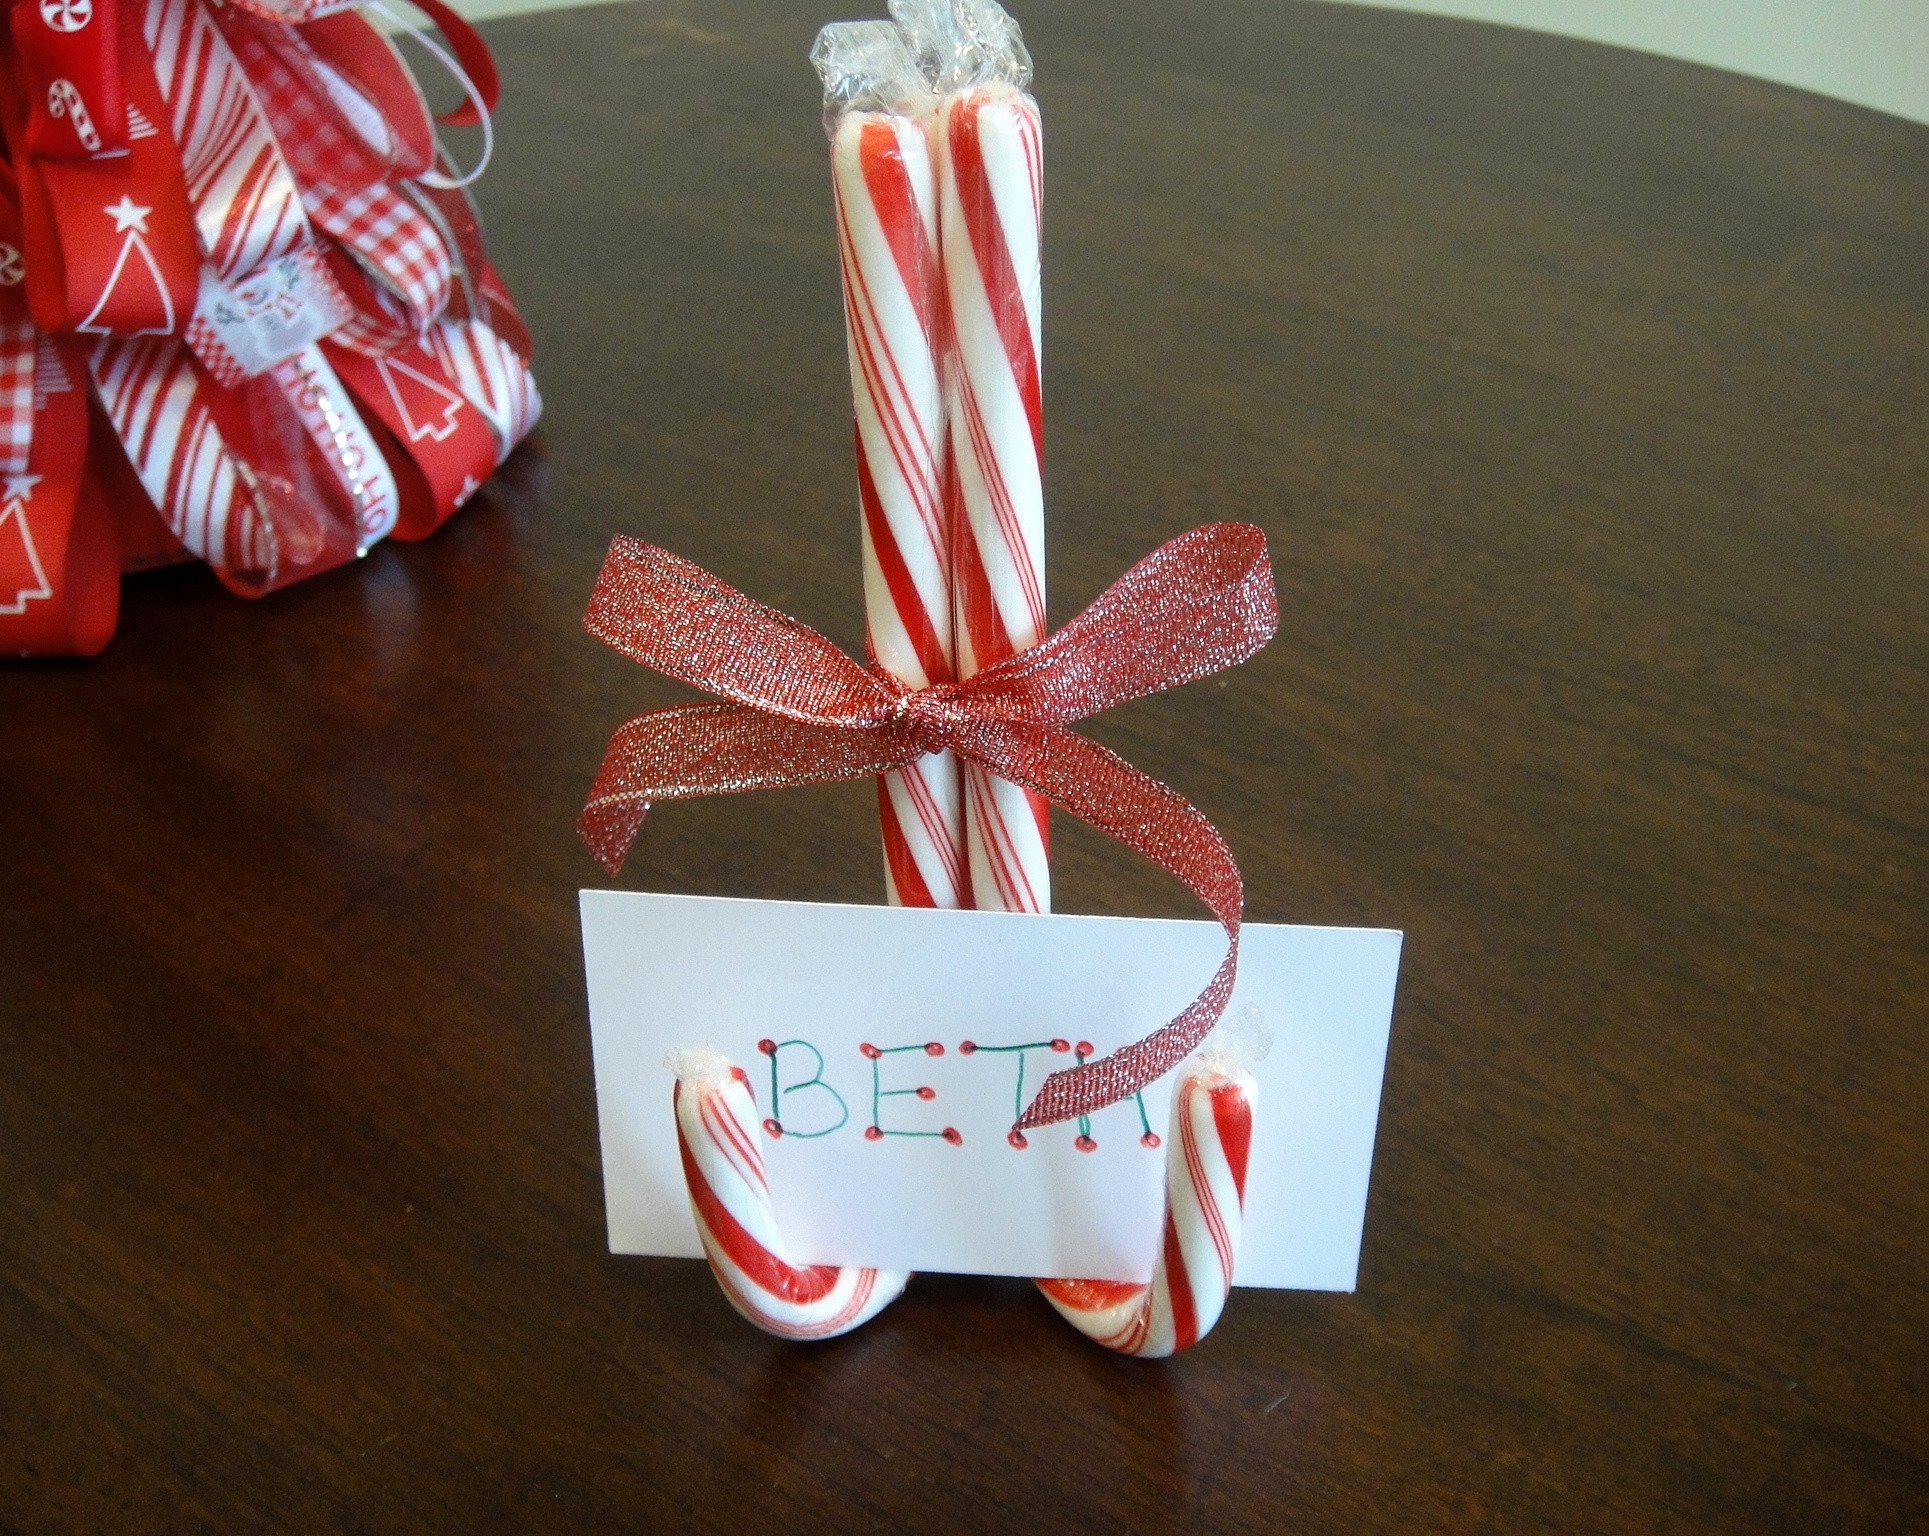 Candy Cane Crafts For Christmas
 Candy Cane Craft Ideas for Kids